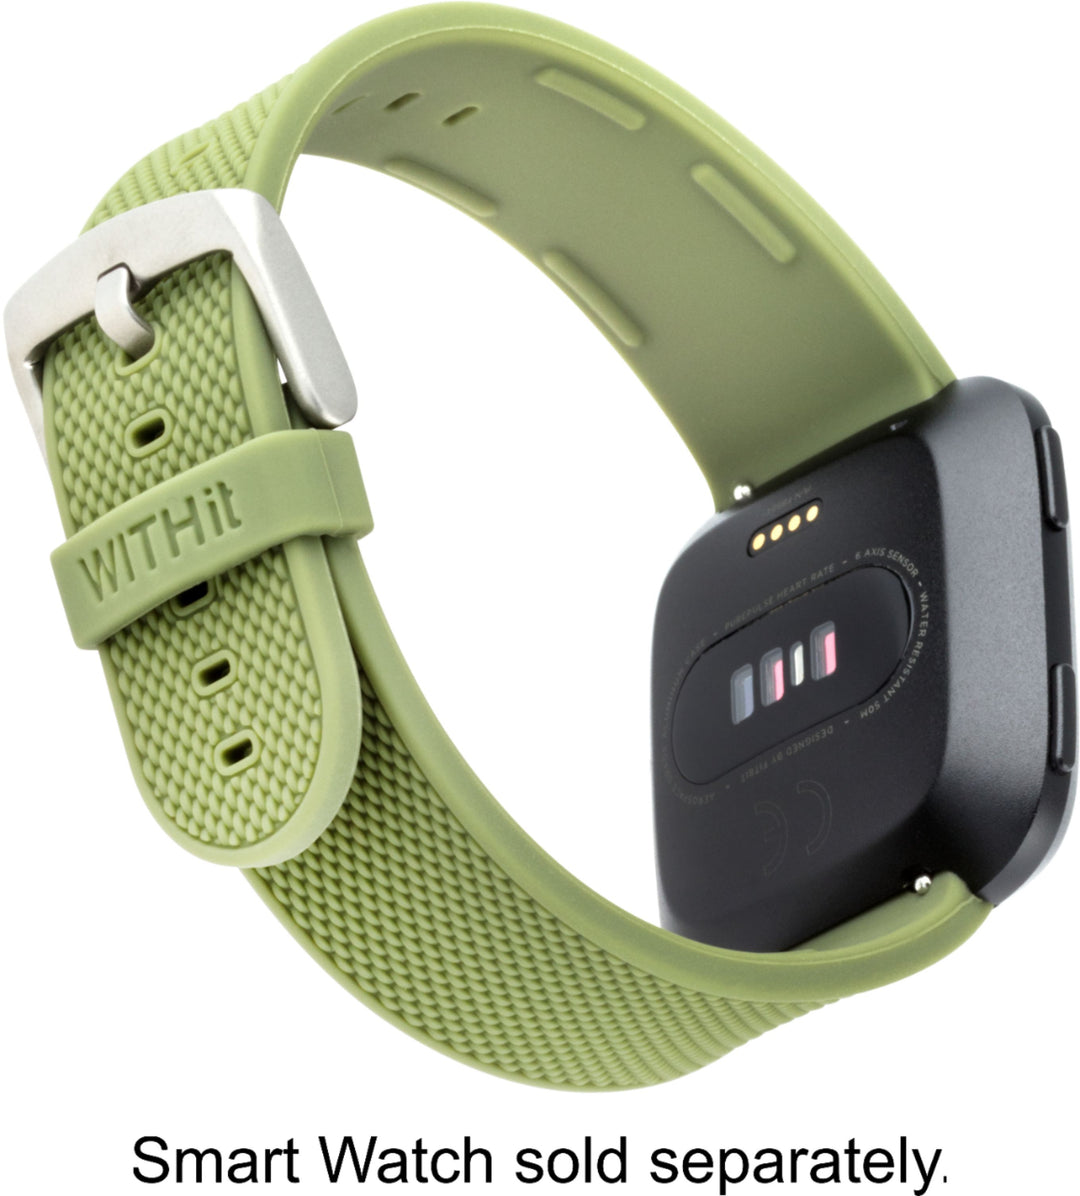 WITHit - Band Kit for Fitbit Versa, Versa Lite and Versa 2 (3-Pack) - Silver/Olive/Navy_6